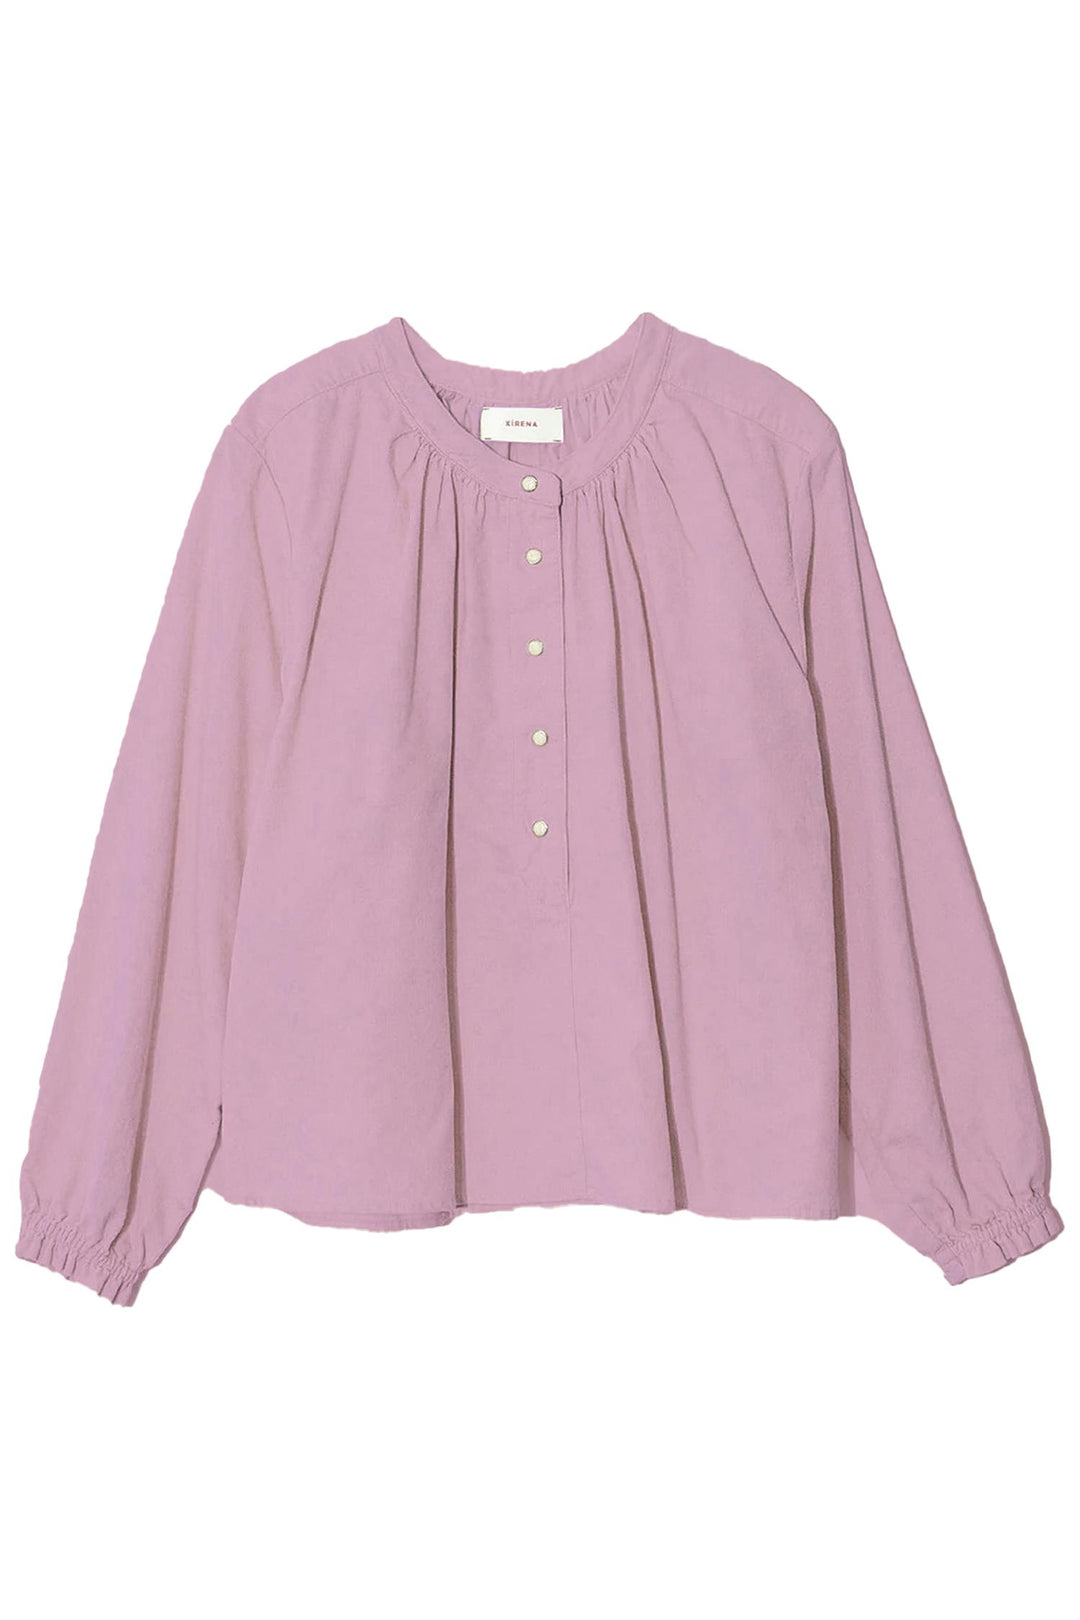 Leigh Top Soft Lilac